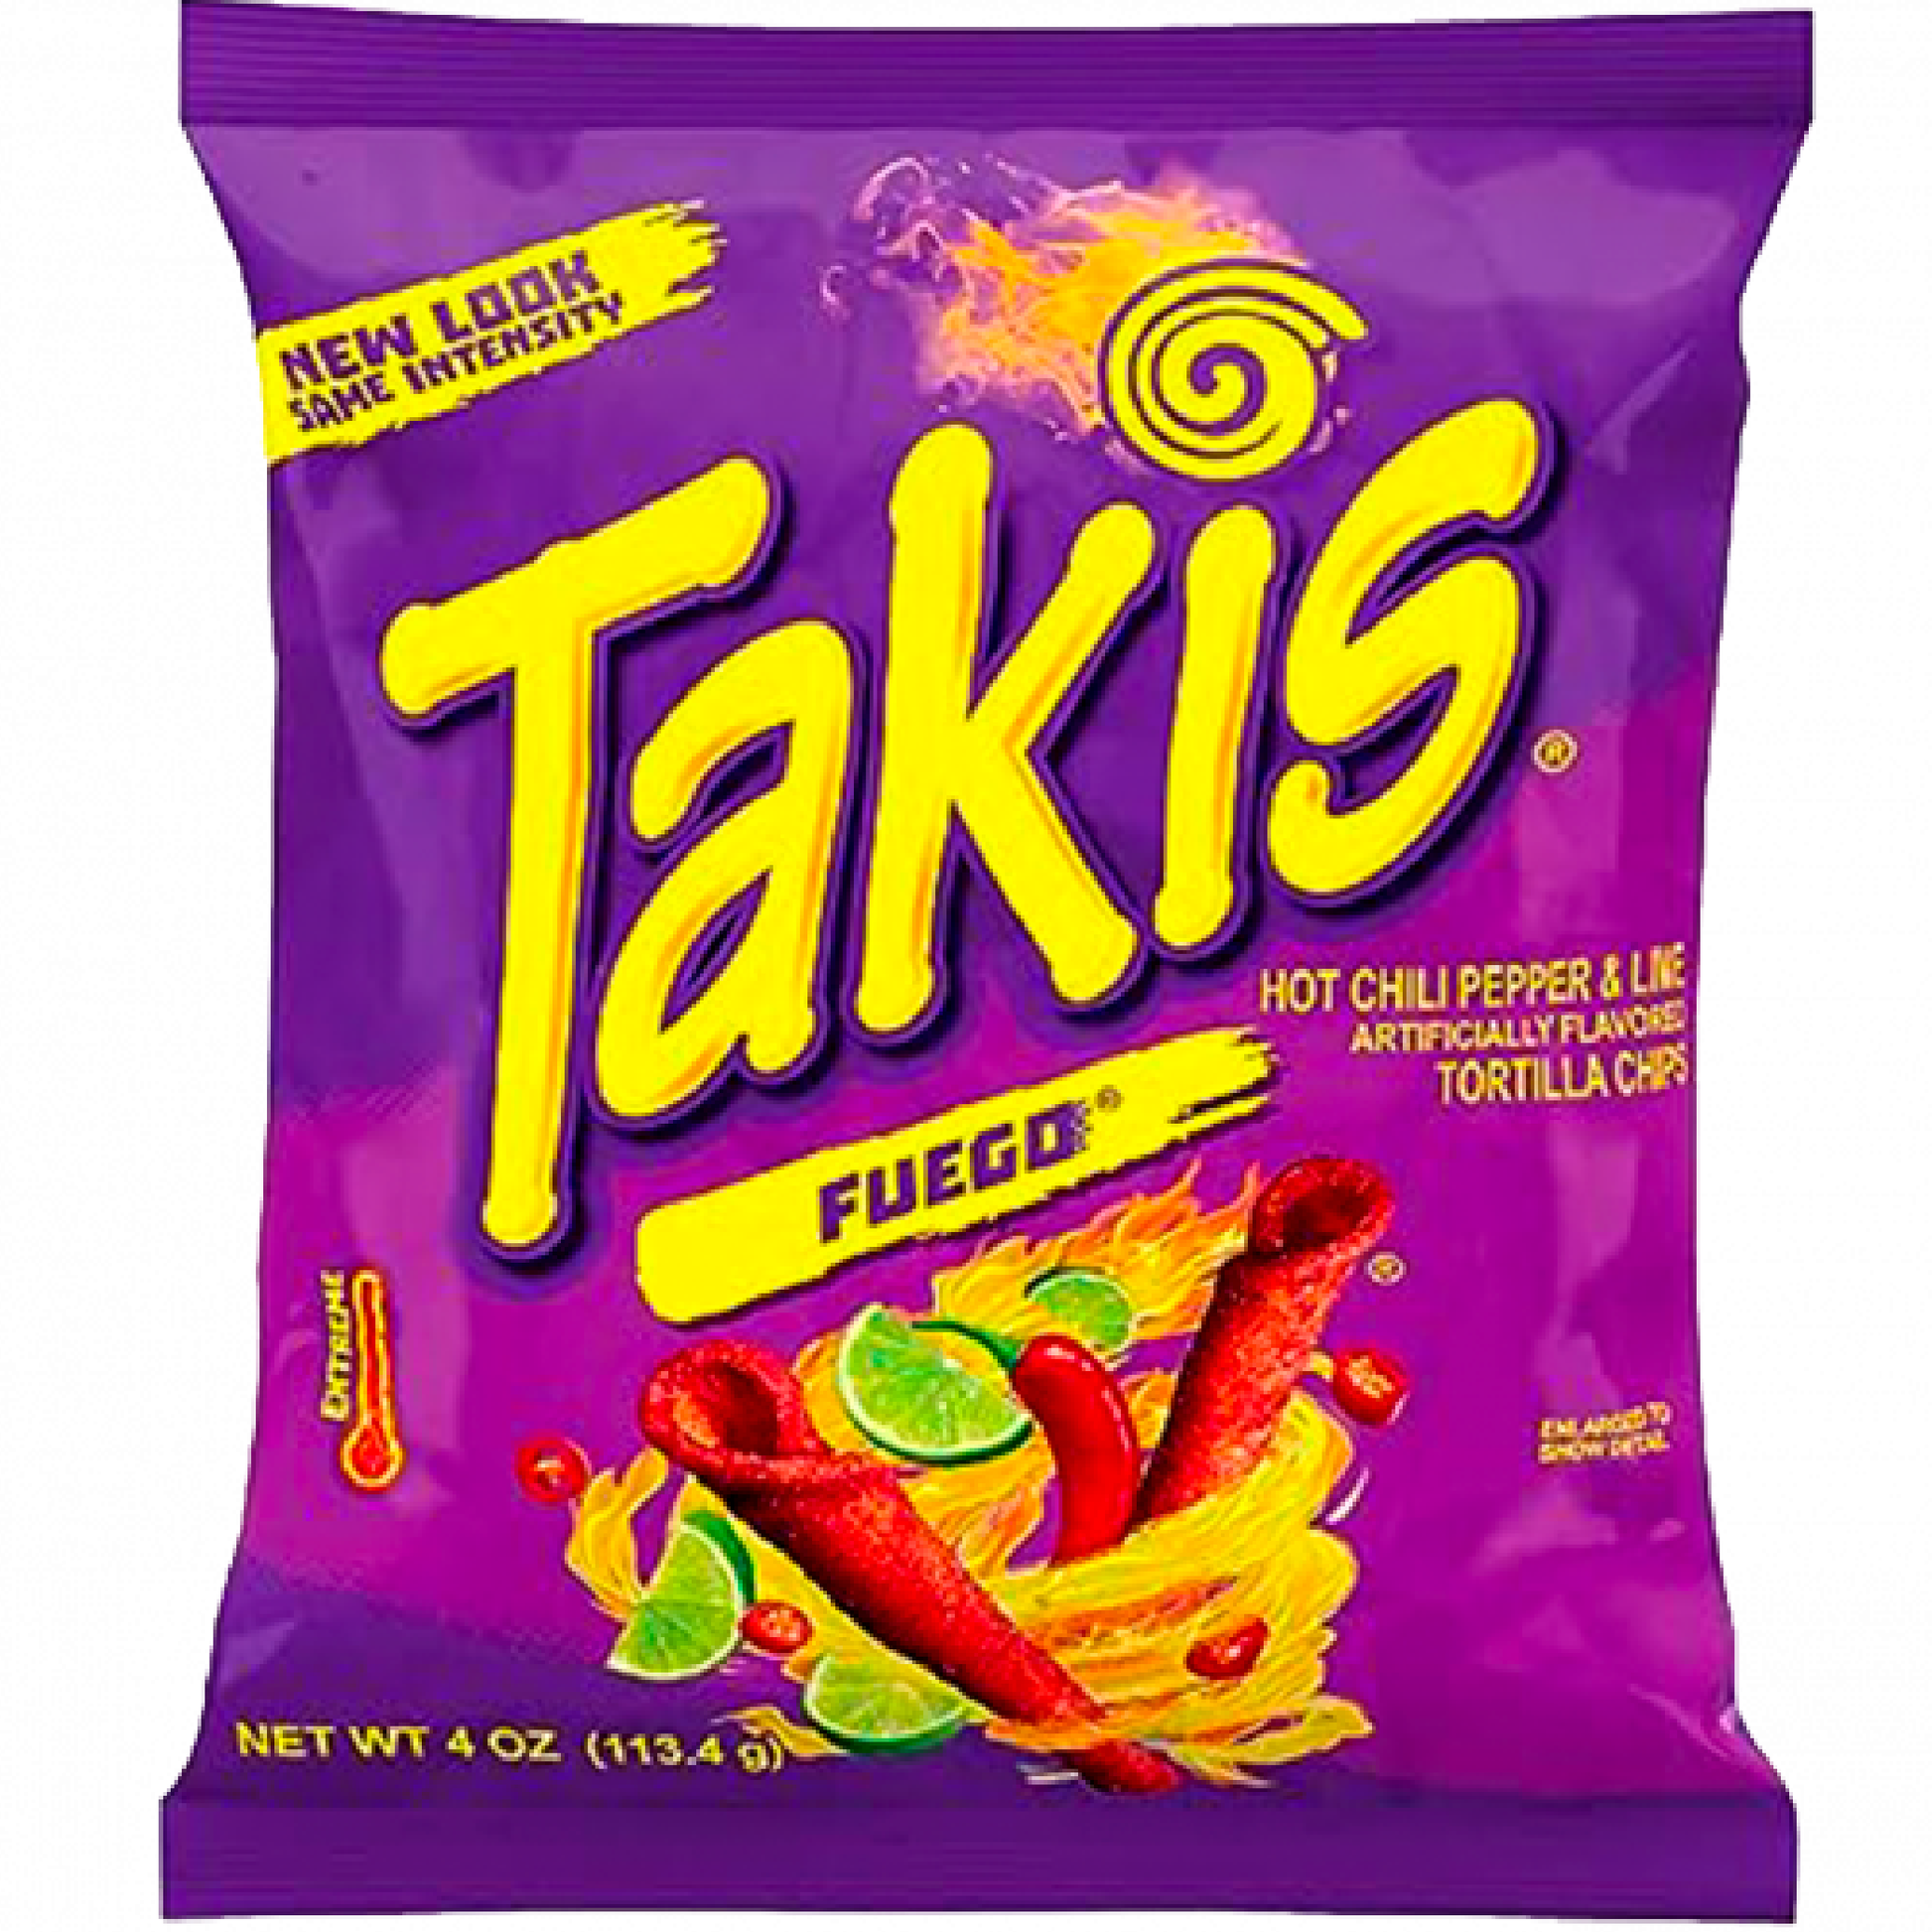 Takis Fuego 55g - Snack-It